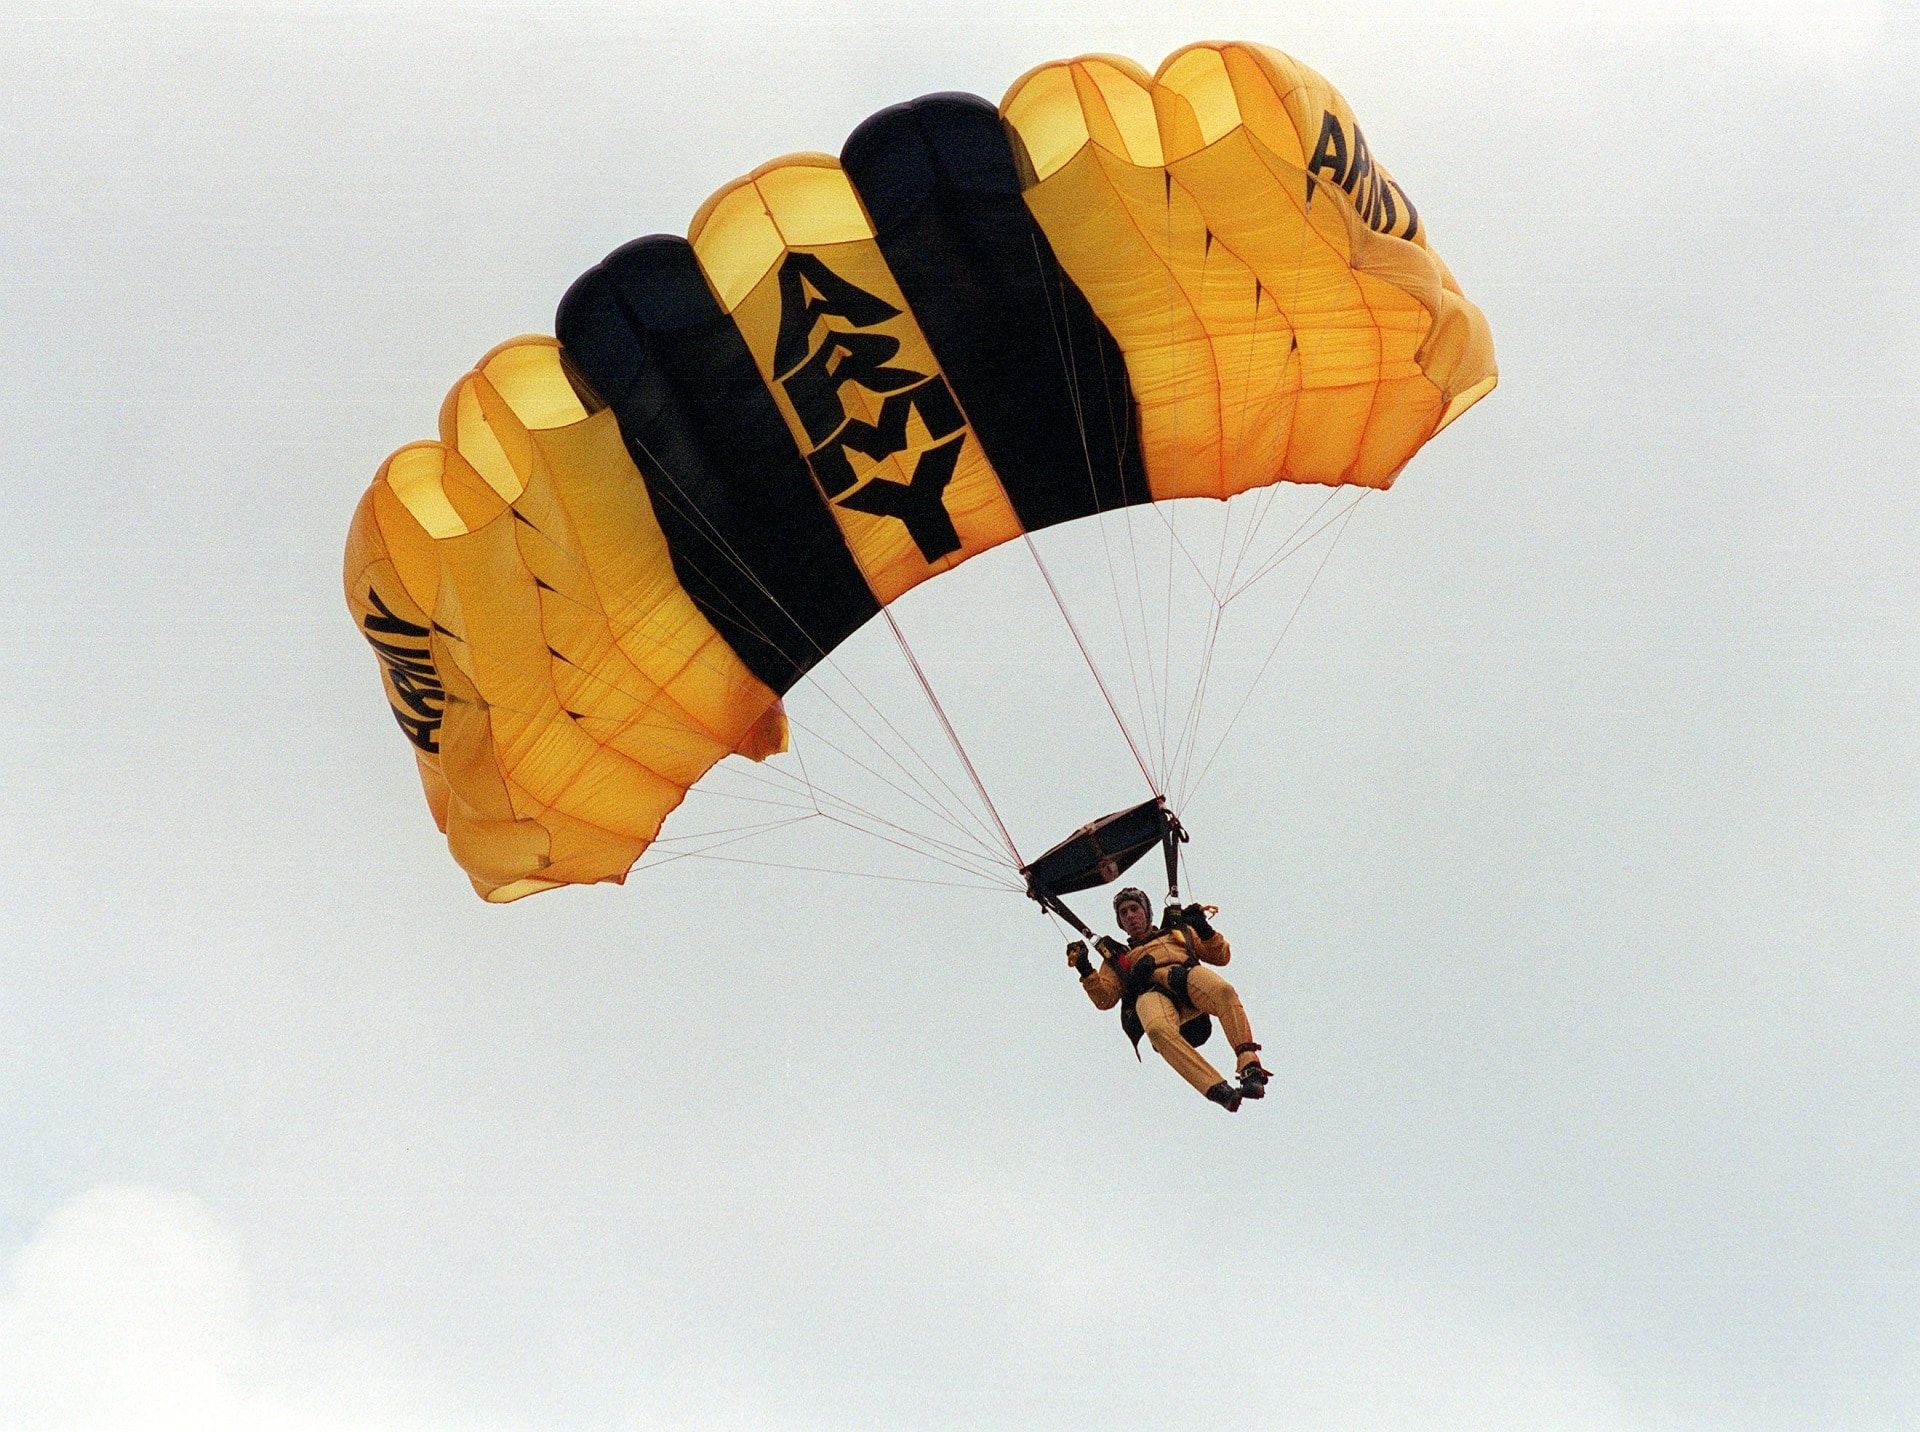 man riding on Army Paraglider during daytime